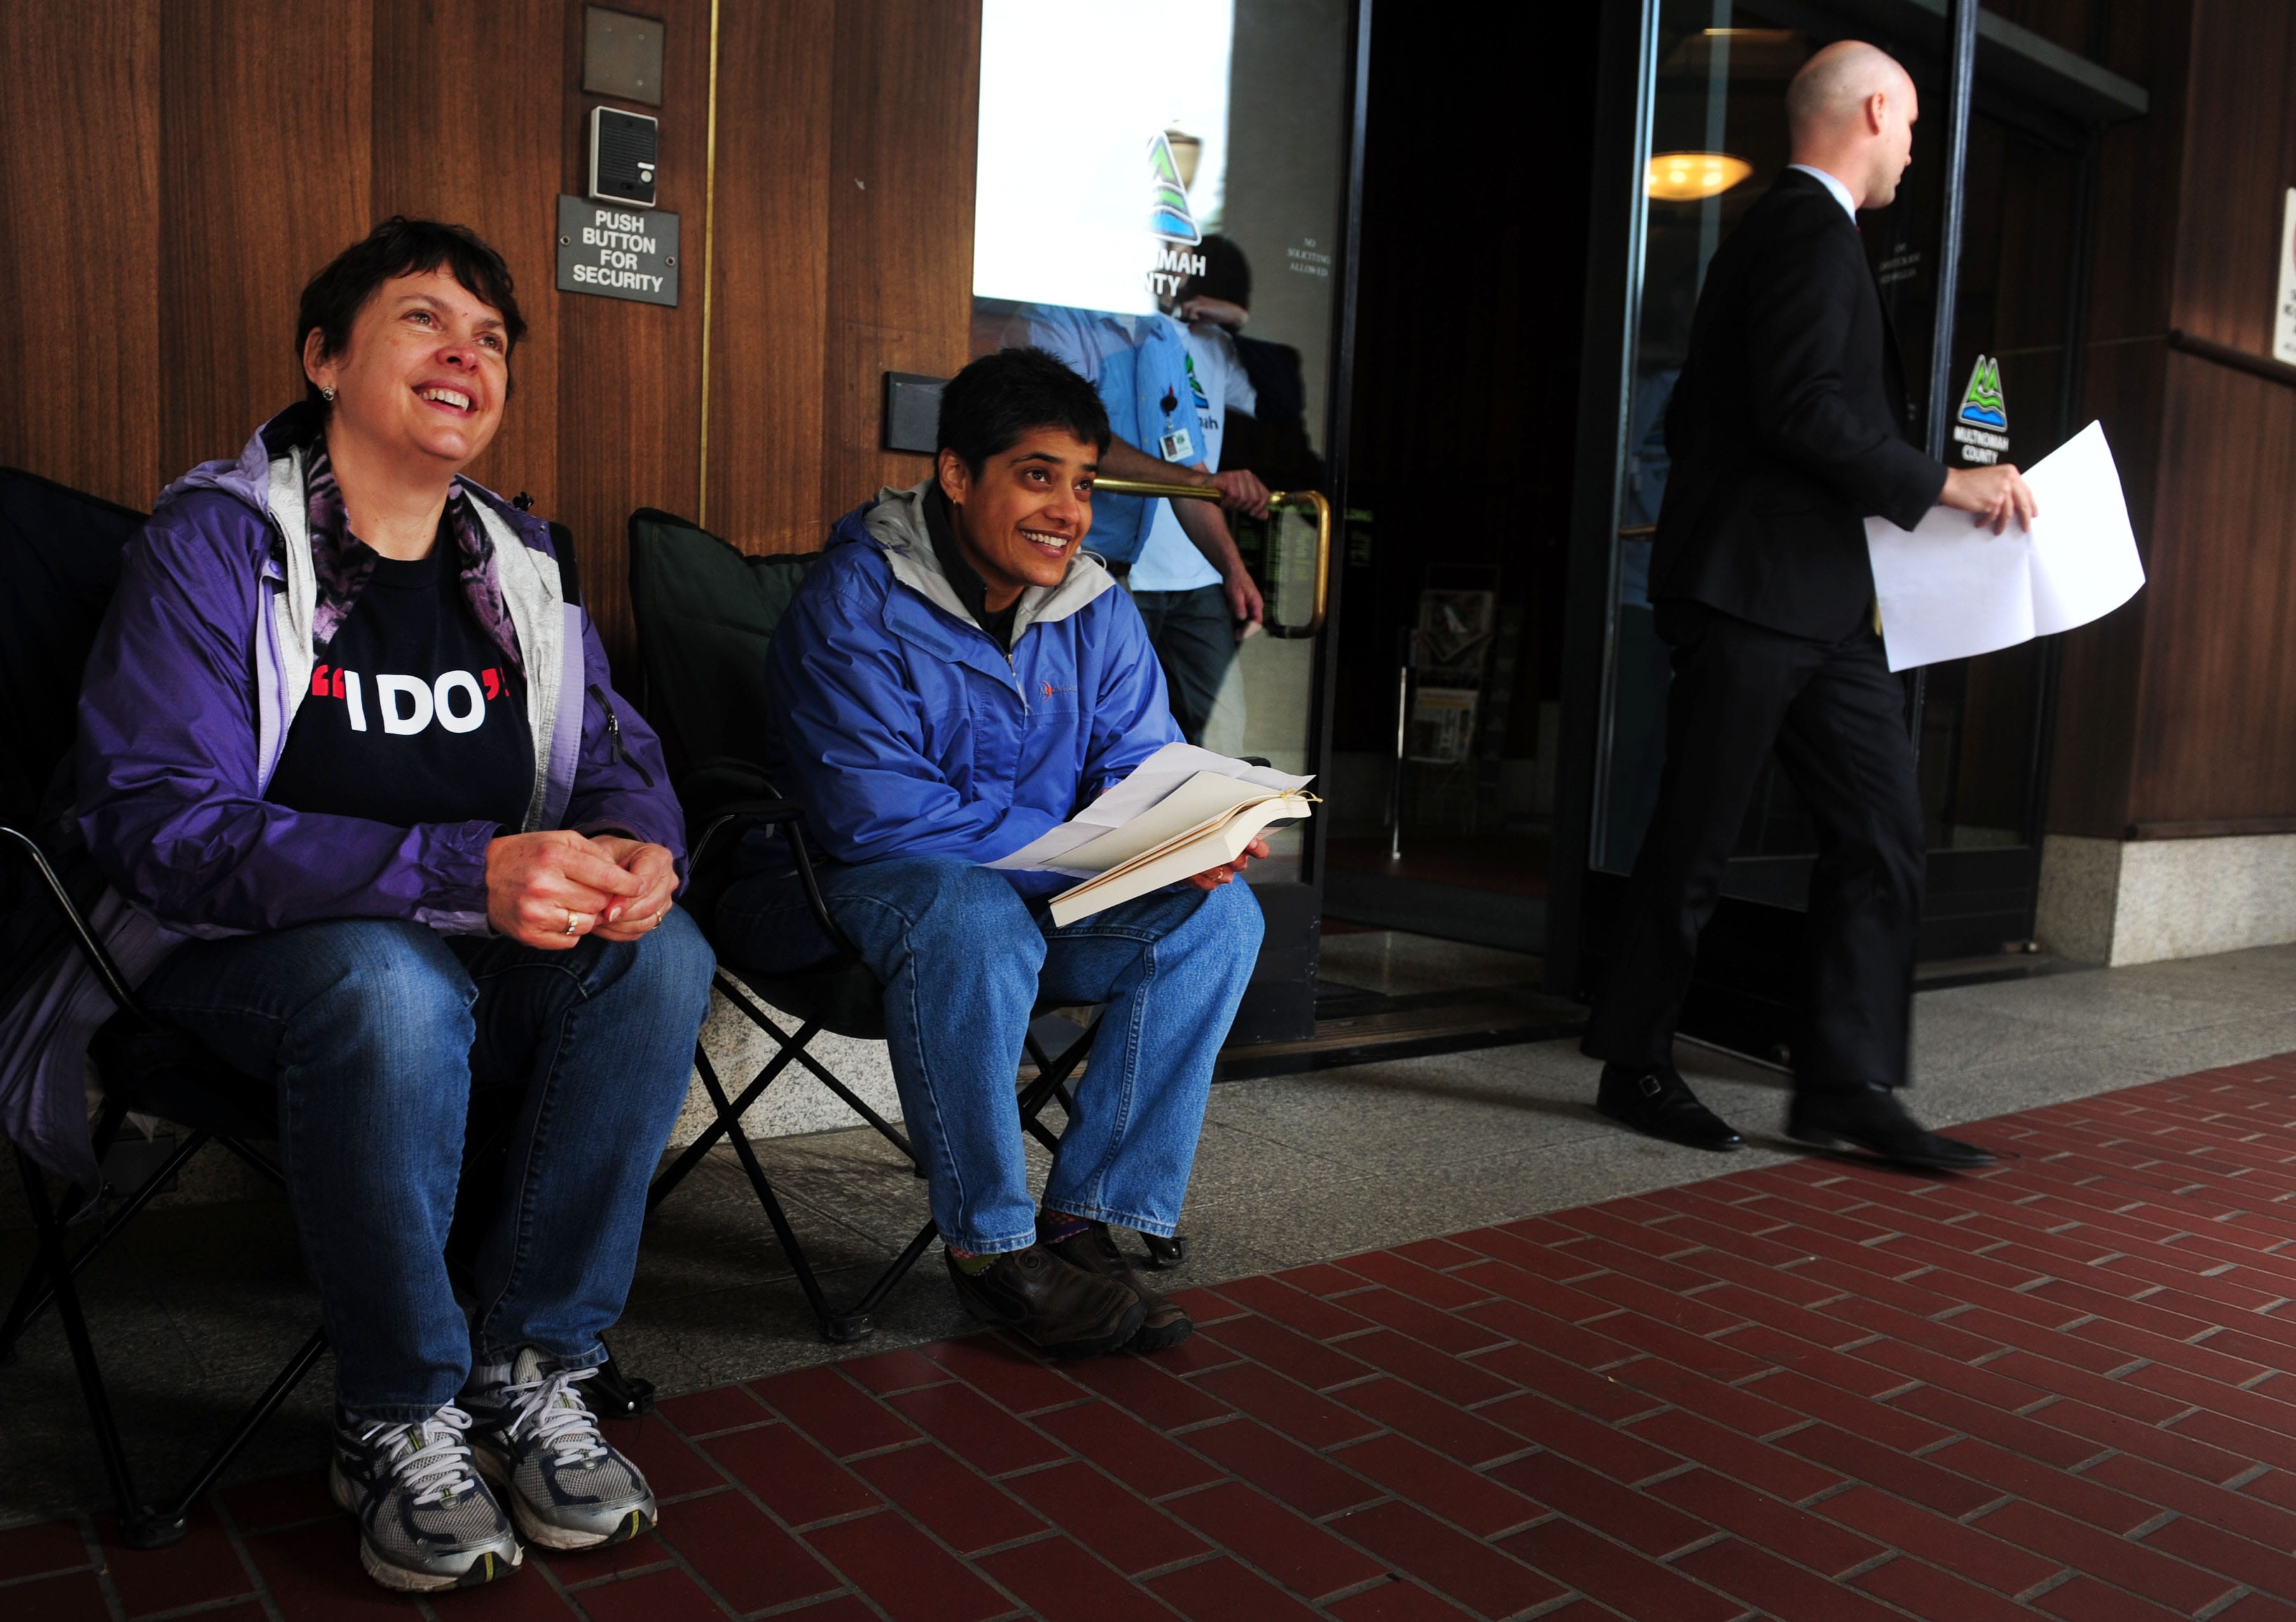 Laurel Gregory, left, and Shilpi Benerjee pass the time in front of the Multnomah County Recorder's building in Portland on Monday.